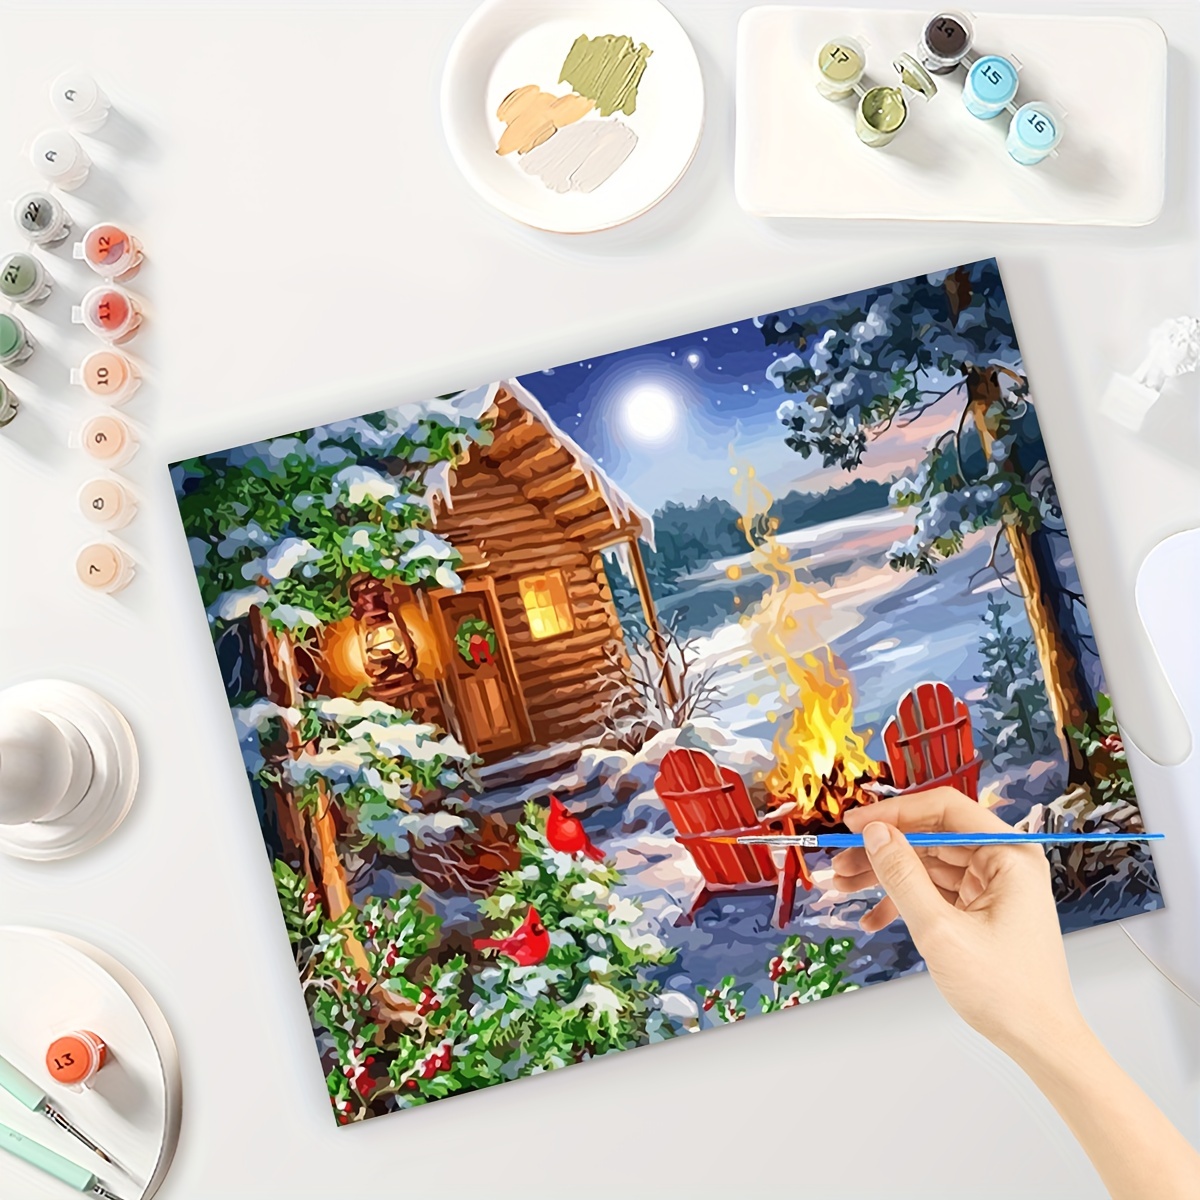 AUREUO Paint by Numbers for Adults with Framed Canvas 16x20 inch, Sleigh Snow Acrylic Painting Kits, Size: 16 x 20